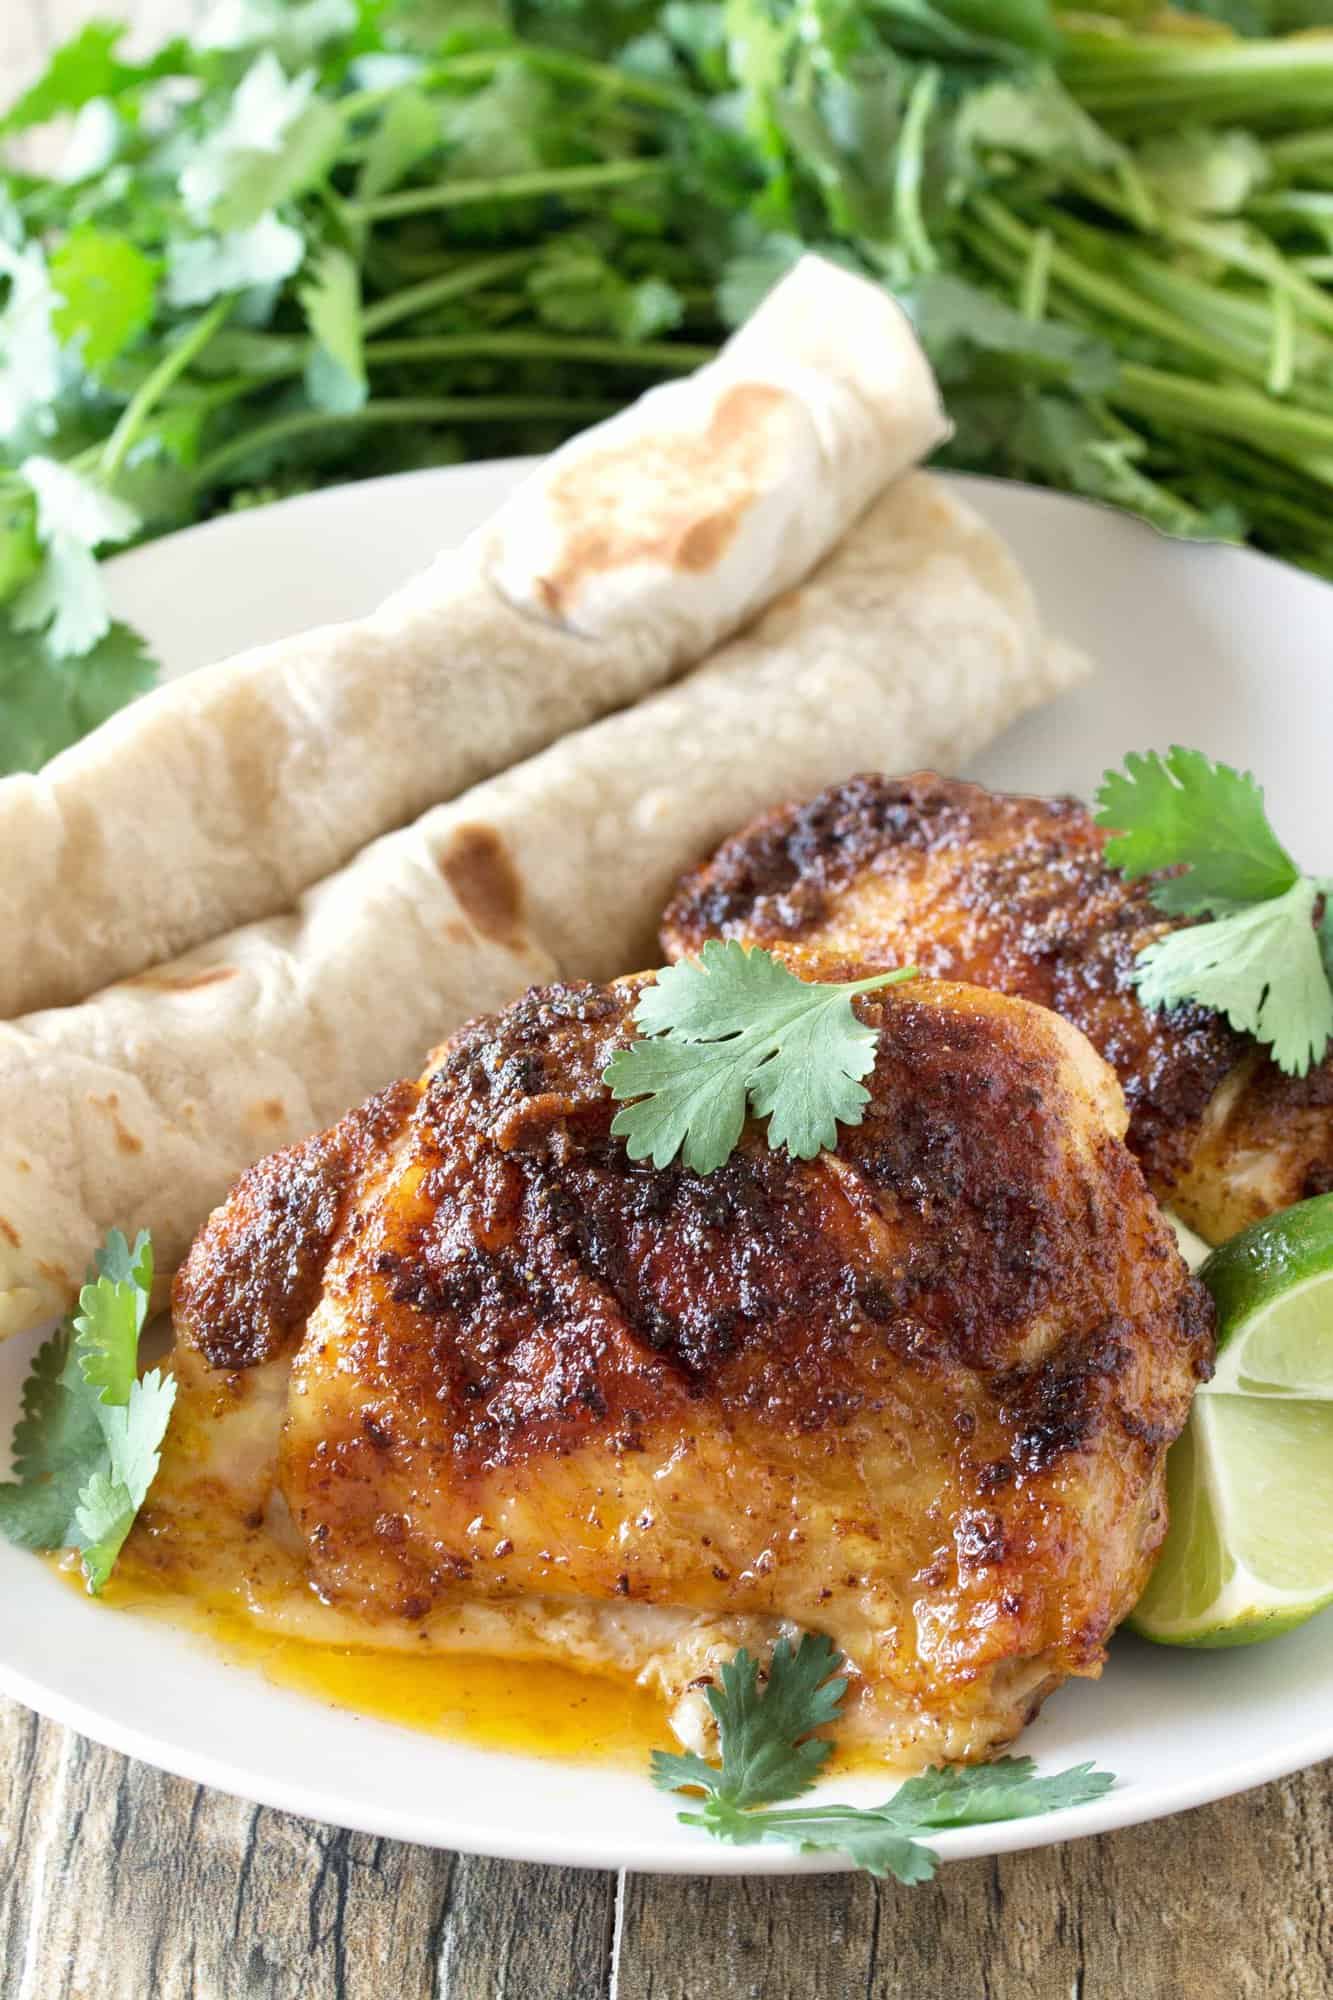 Mexican-Spiced Chicken Thighs take less than 5 minutes to get in the oven and are amazing served up with warm tortillas. It's an easy and delicious dinner!